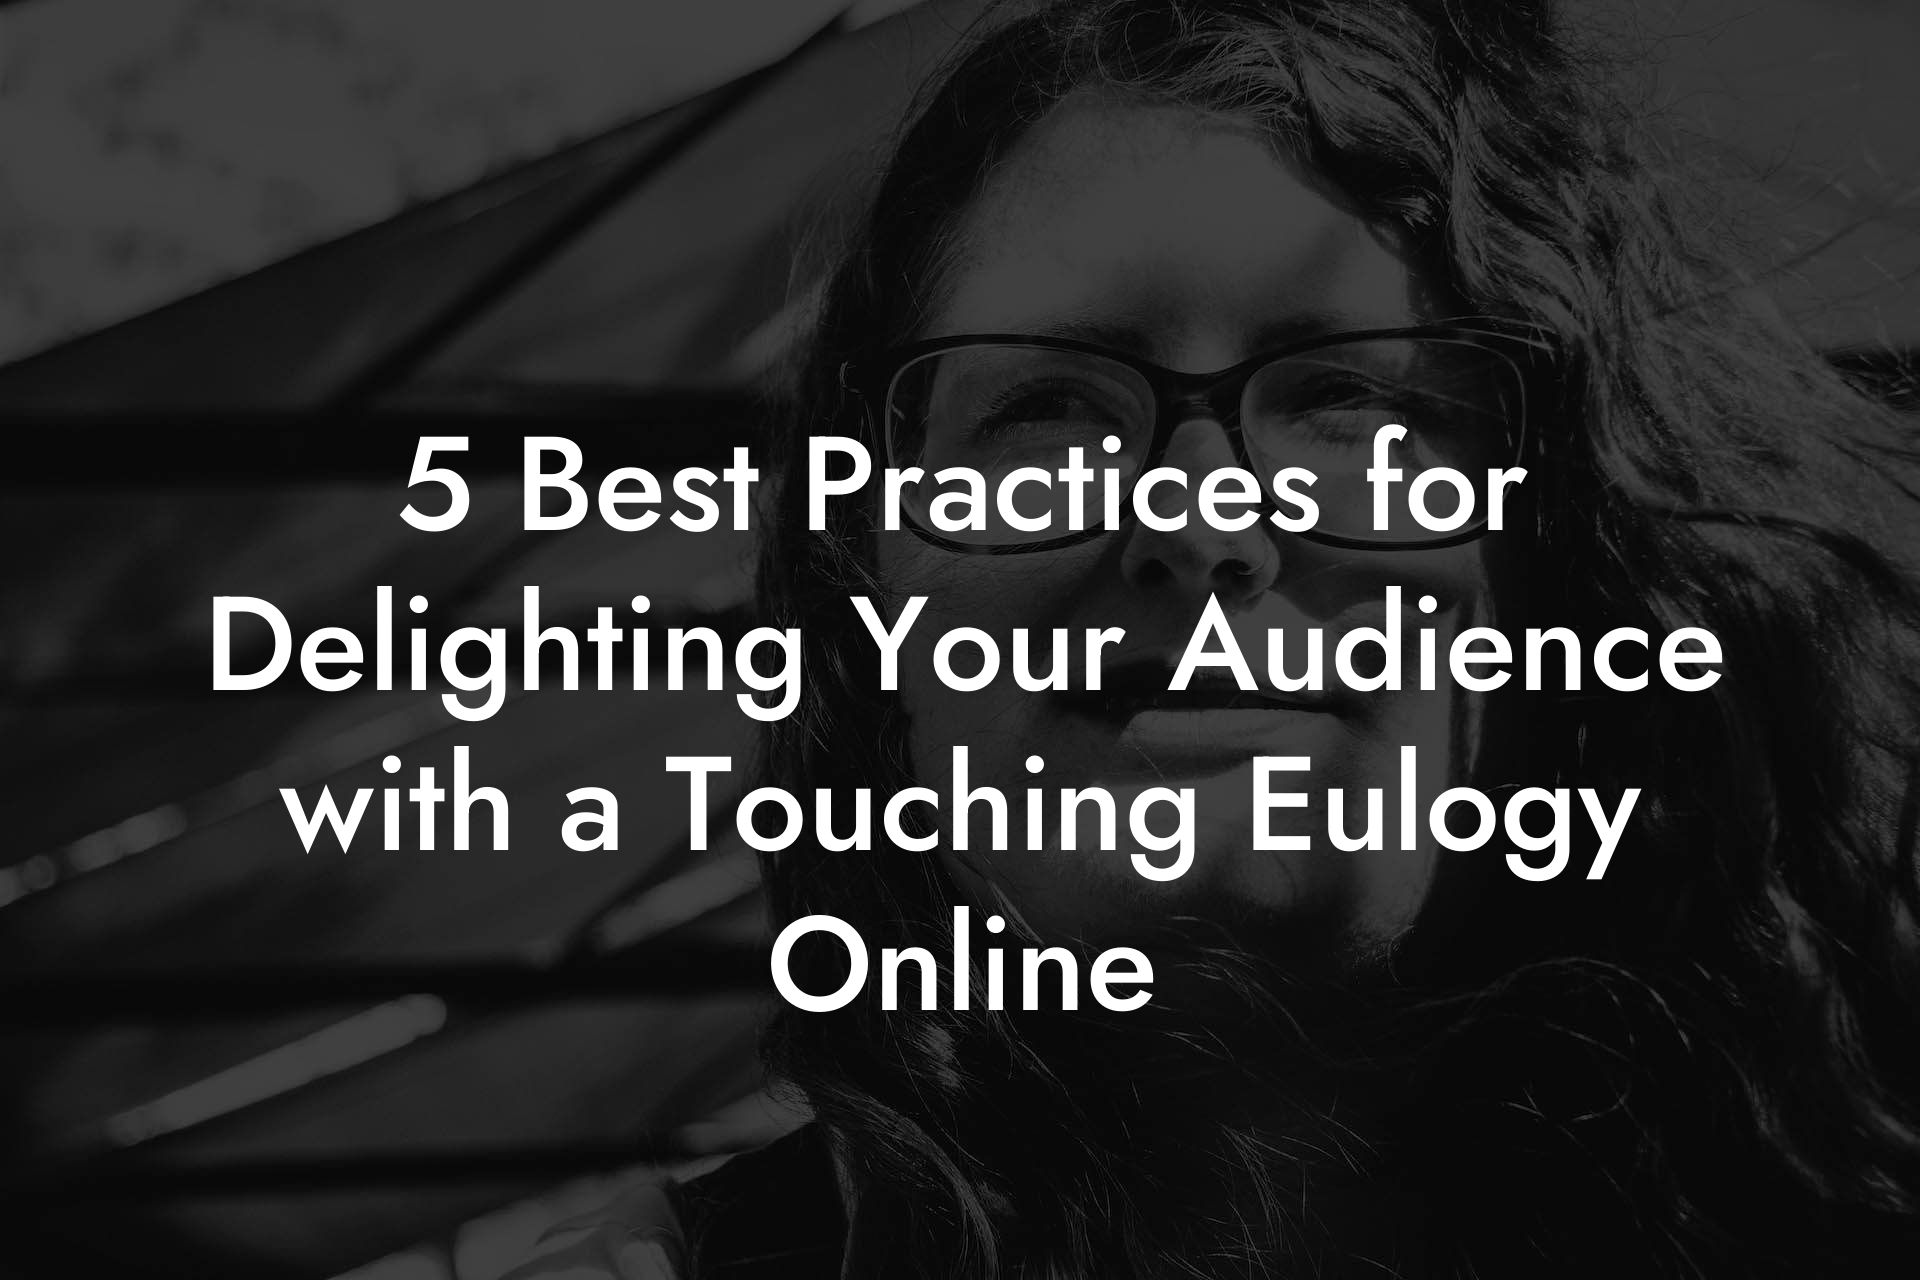 5 Best Practices for Delighting Your Audience with a Touching Eulogy Online